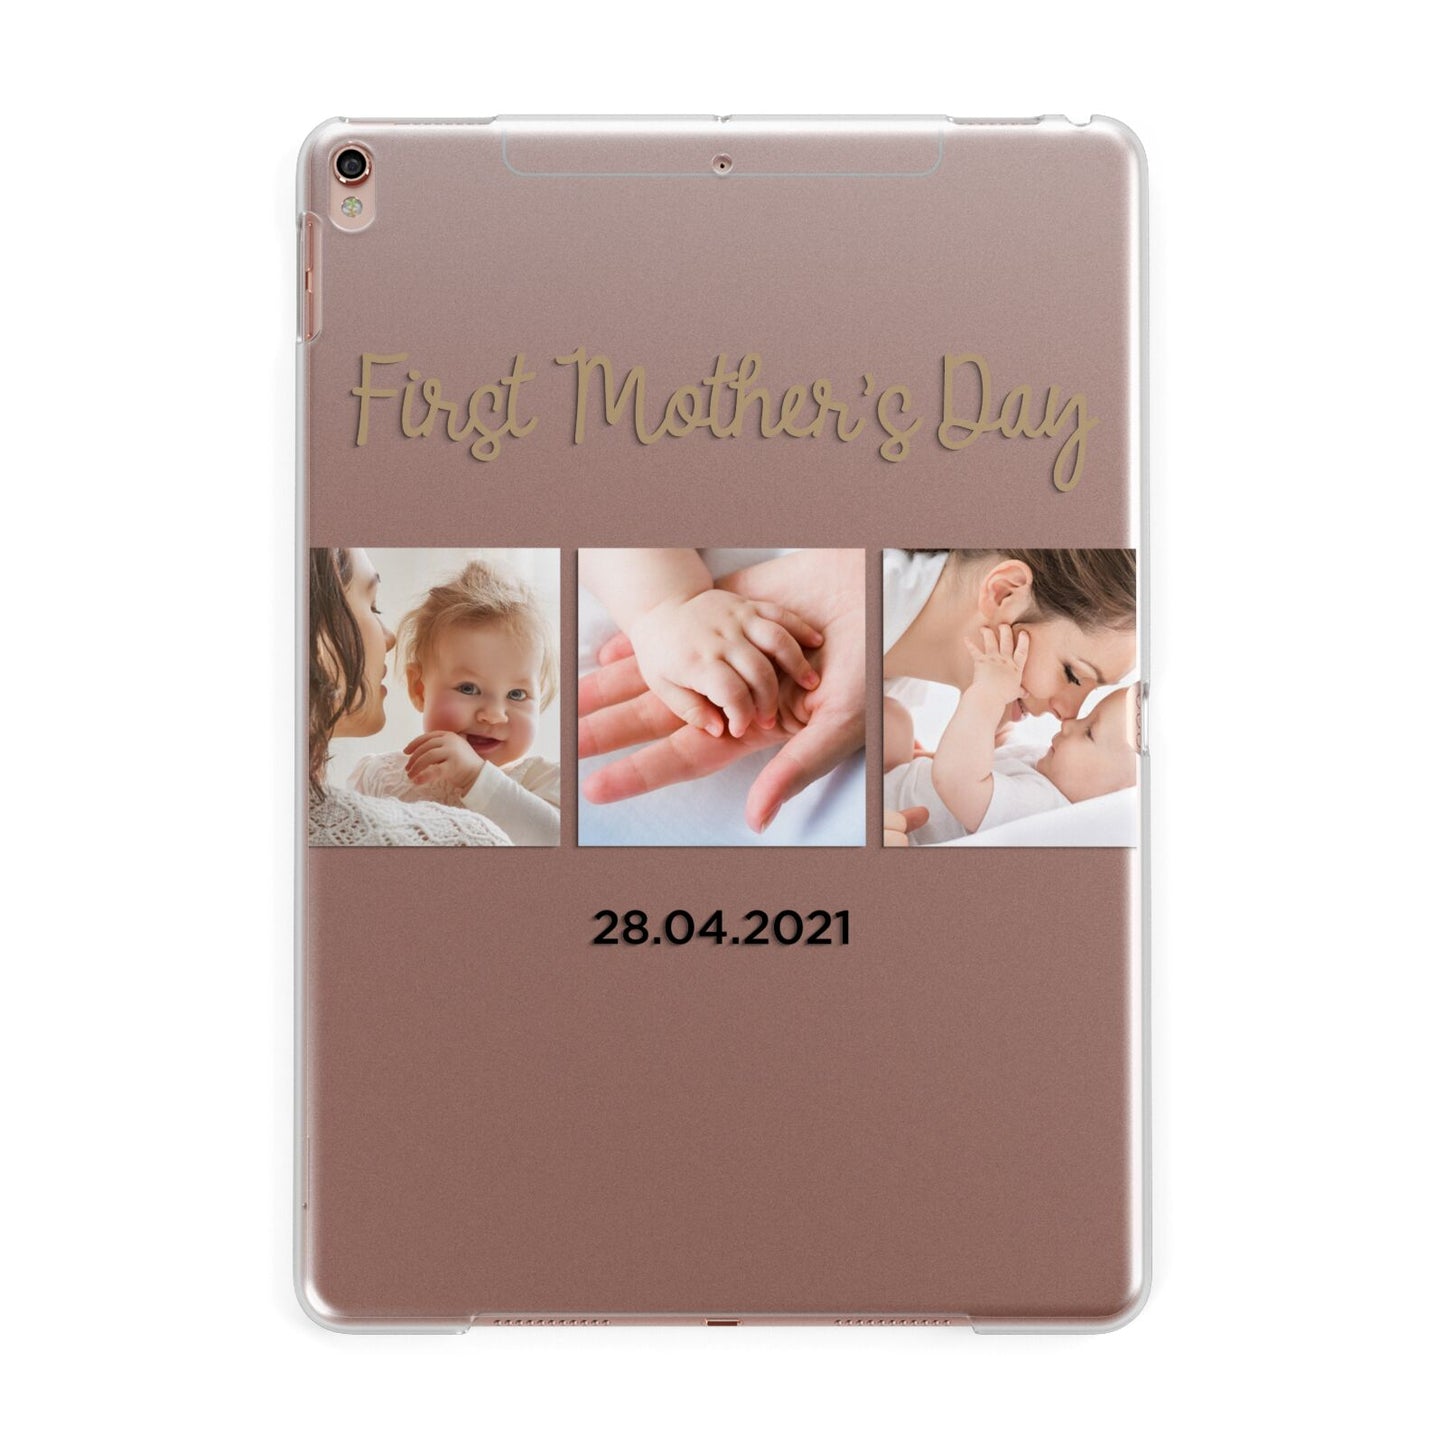 First Mothers Day Photo Apple iPad Rose Gold Case